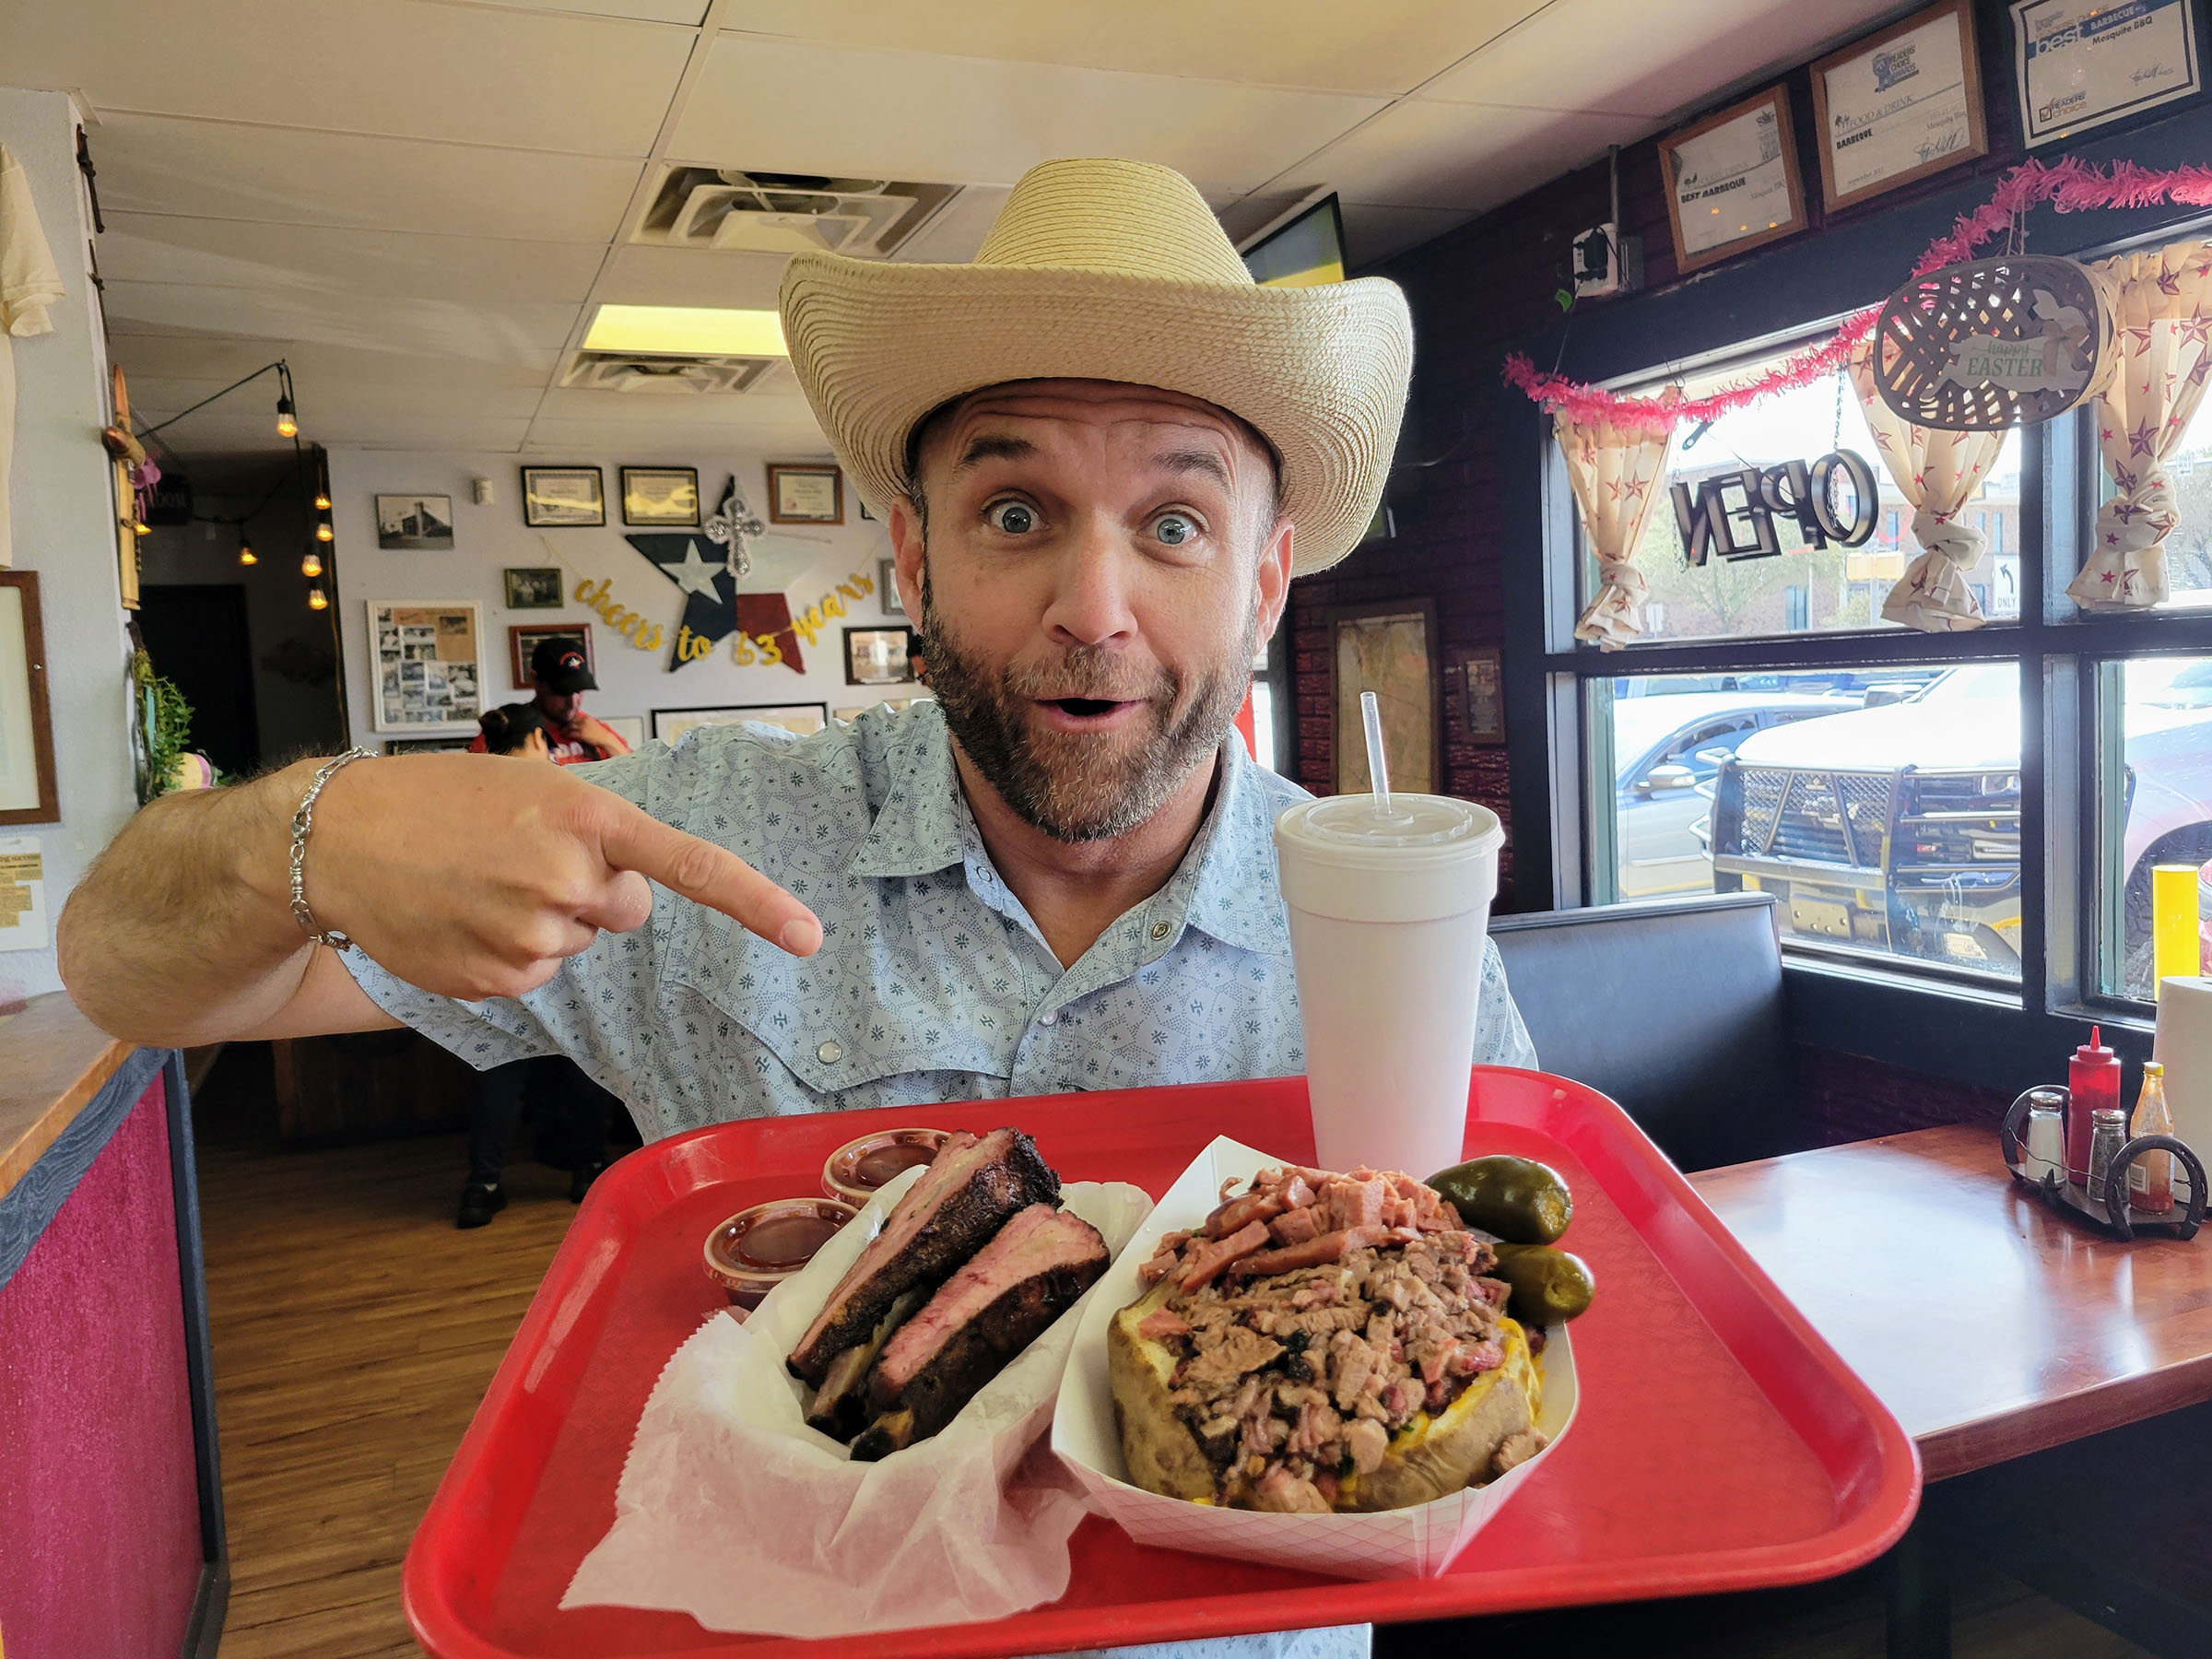 A man in a cowboy hat makes a silly goofy face and points at an assortment of barbecue on a red tray